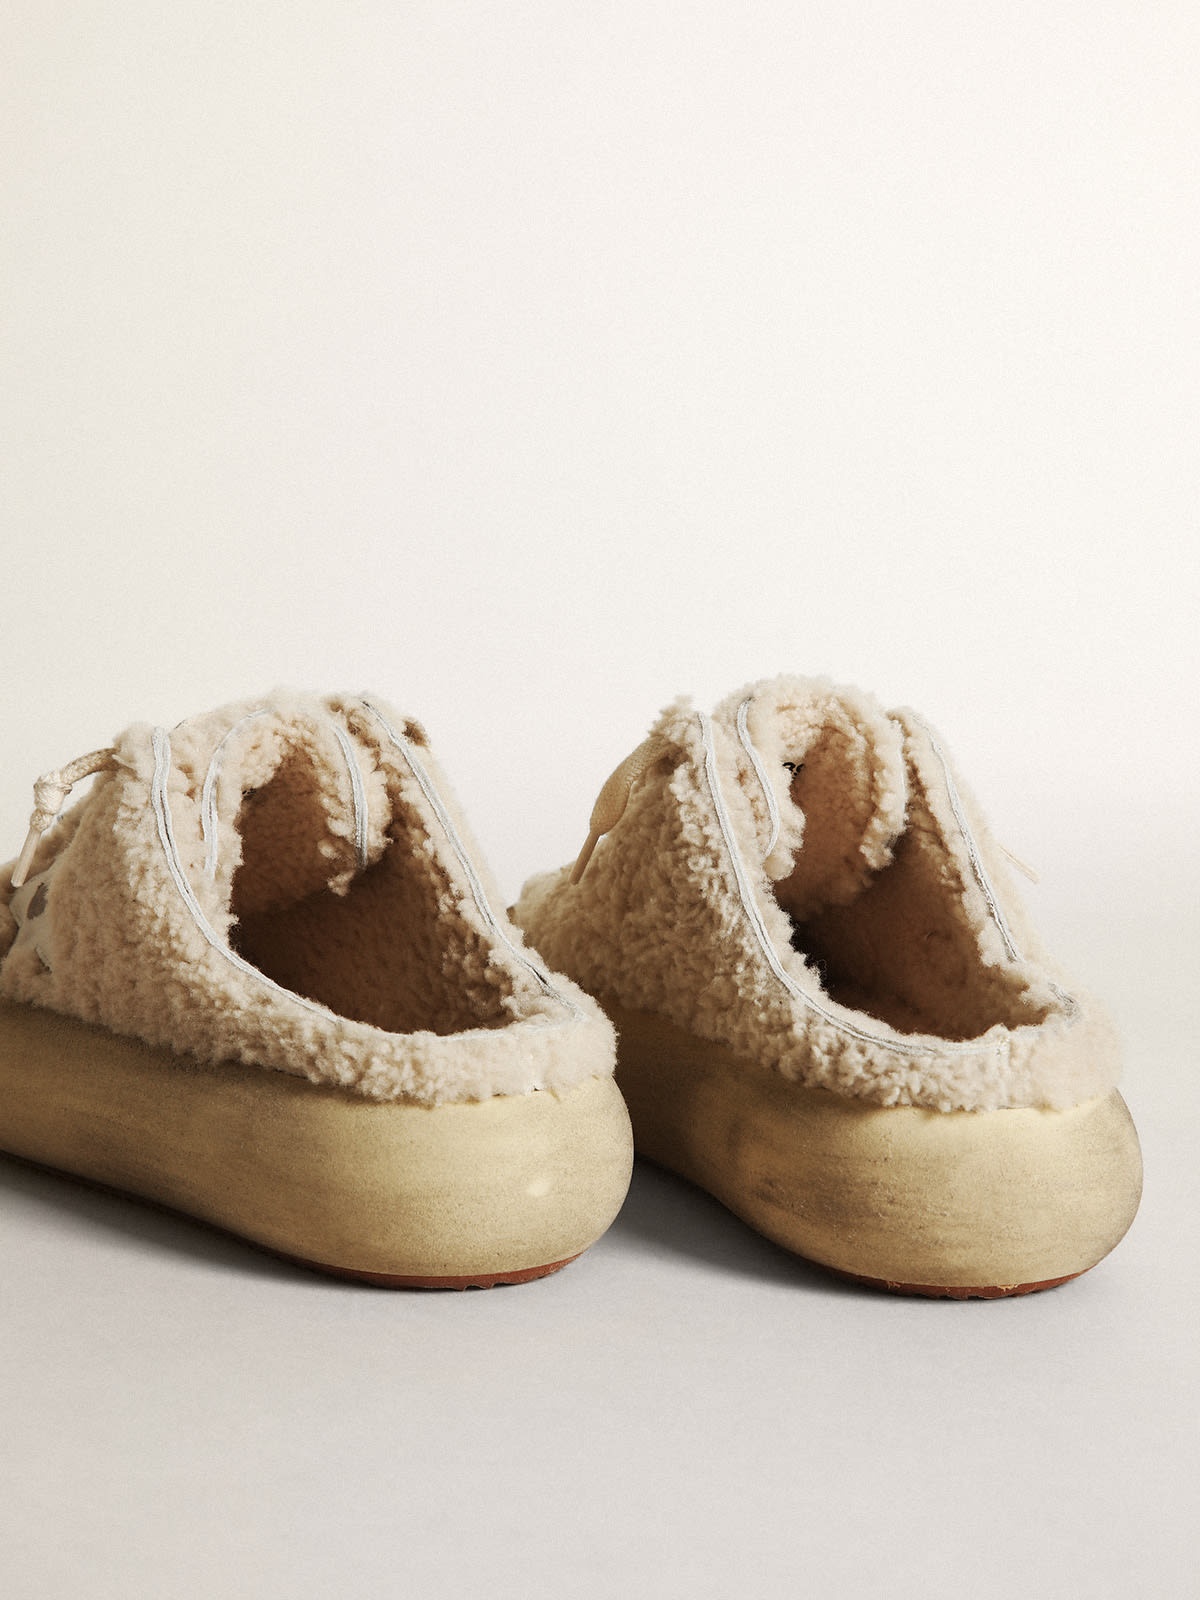 Women’s Space-Star Sabots in beige shearling with white leather star - 5